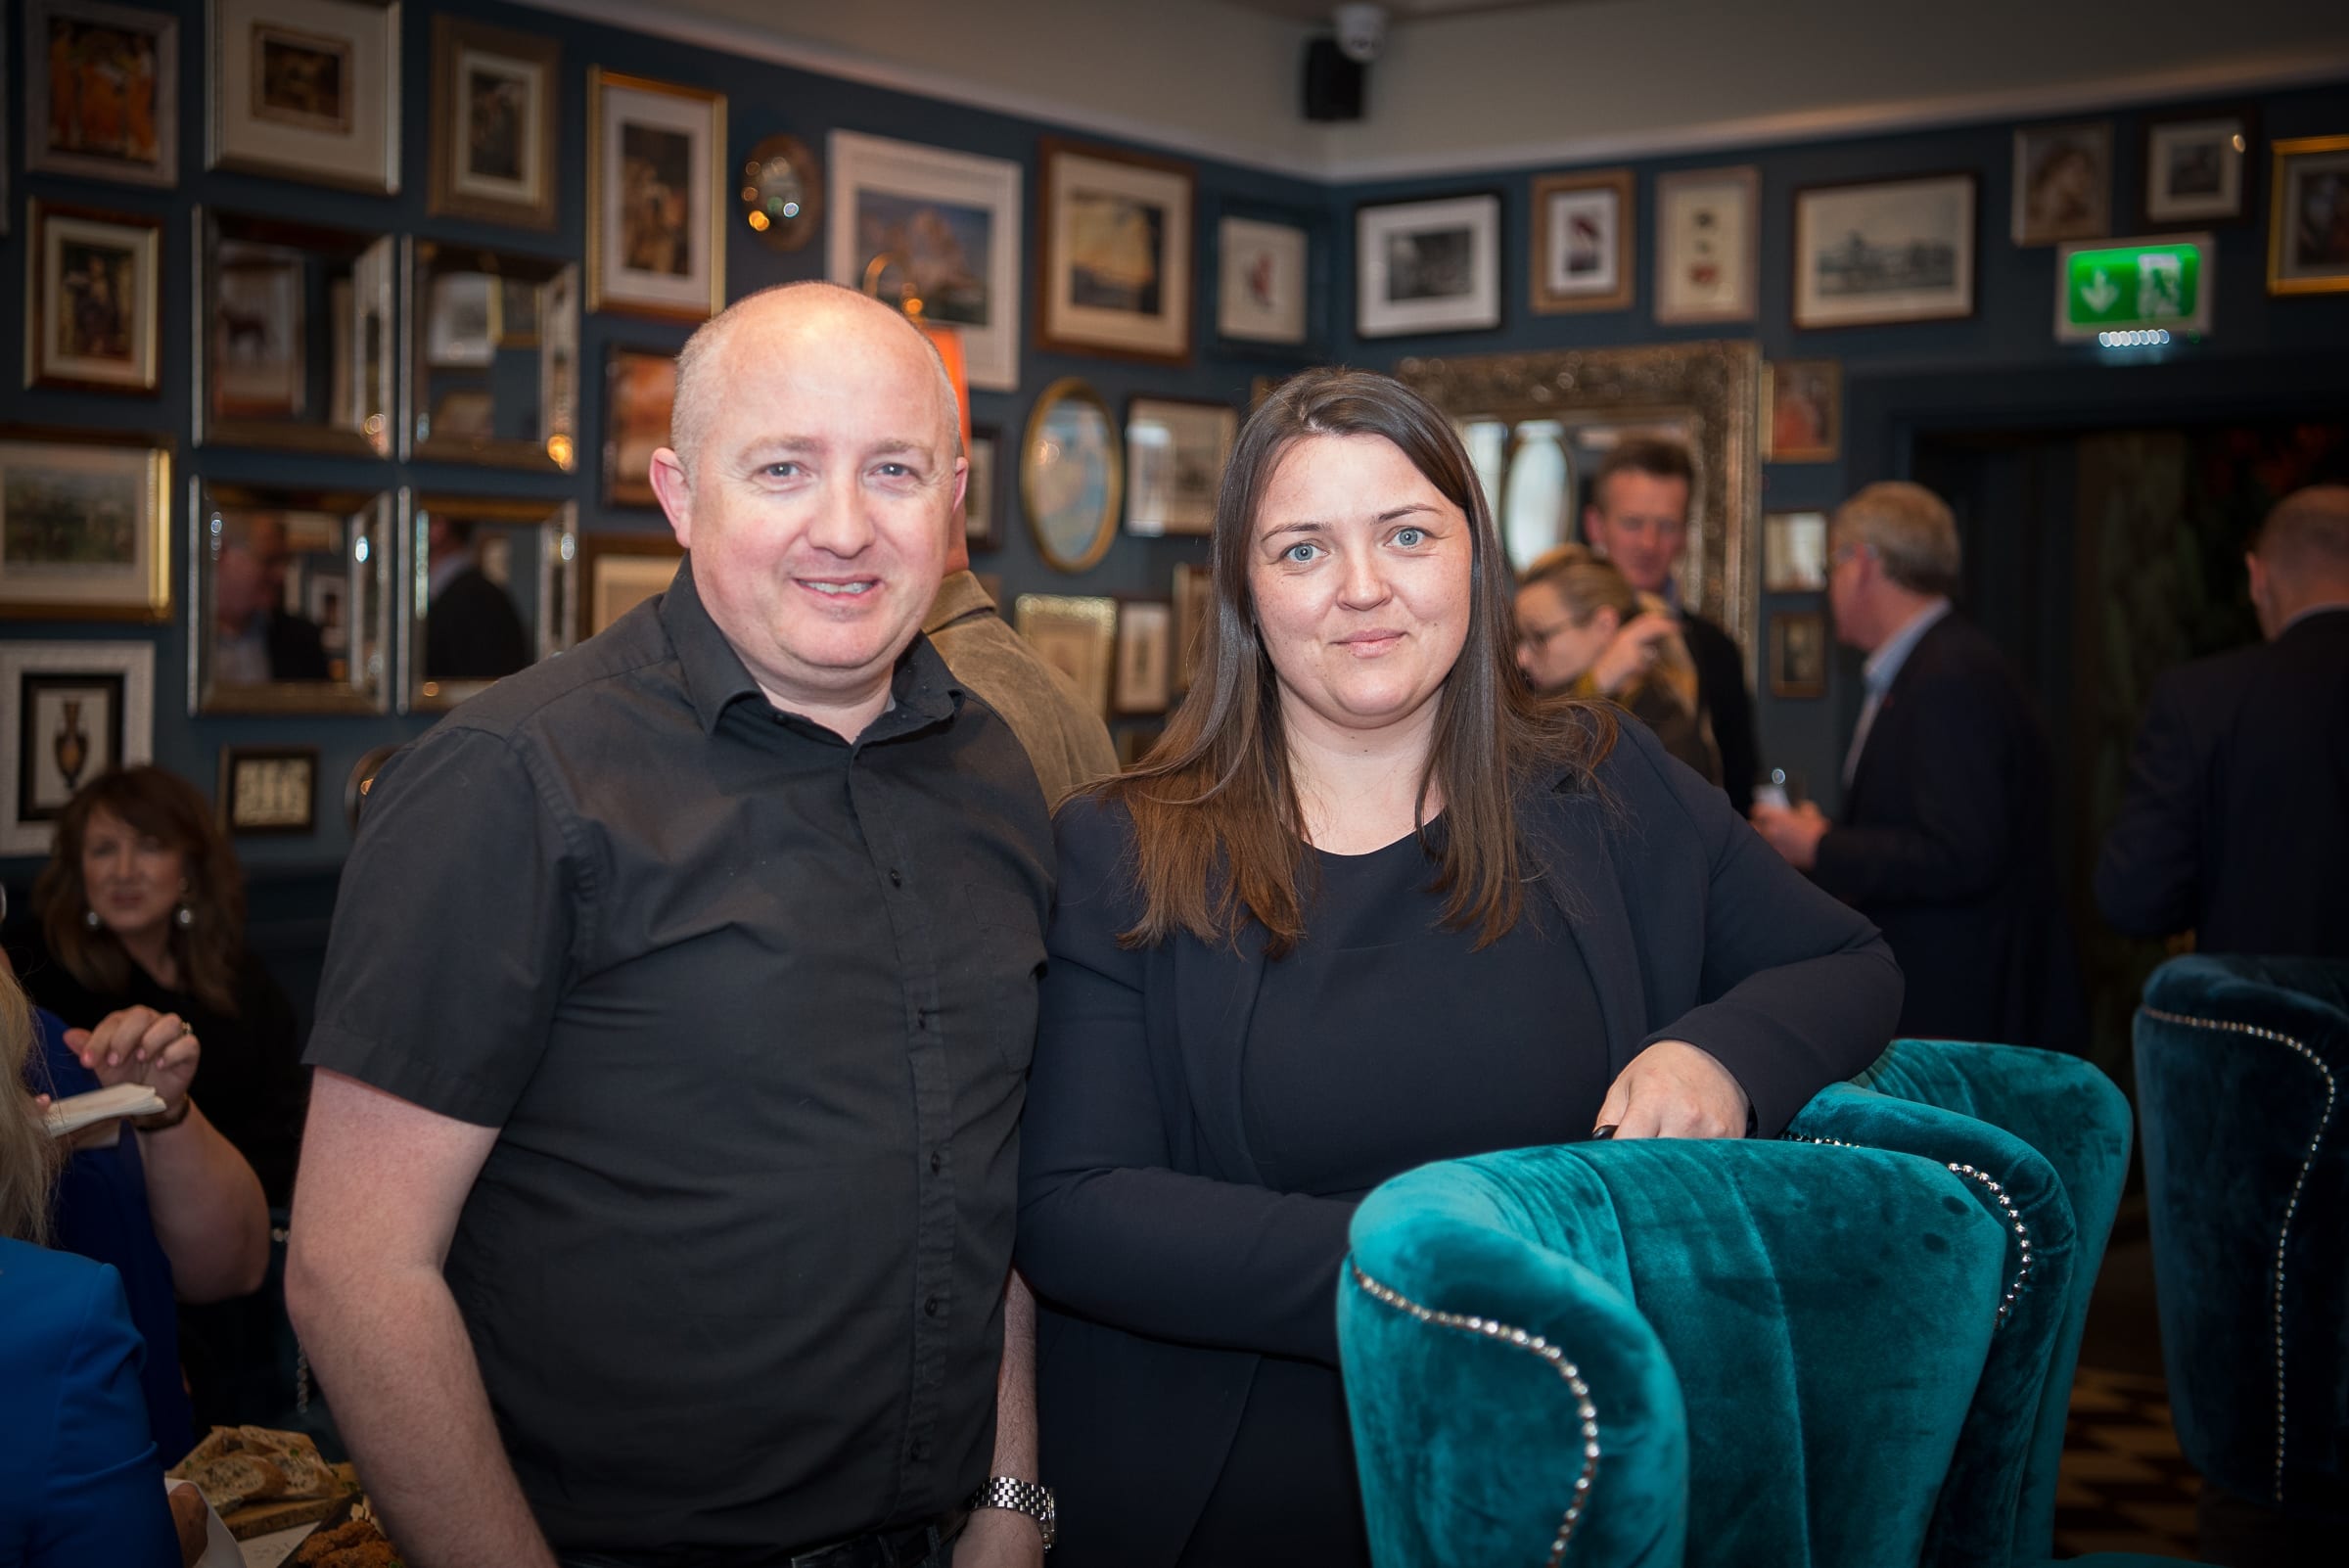 No repro fee: Networking with a Difference held in 101 O’Connell Street. Facilitated by Stephen Pitcher.  23-05-2019, From Left to Right: Dermot Hughes  - Fly Cruise Stay, Roisin Moloney Weekes - MHP Solicitors. 
Photo credit Shauna Kennedy